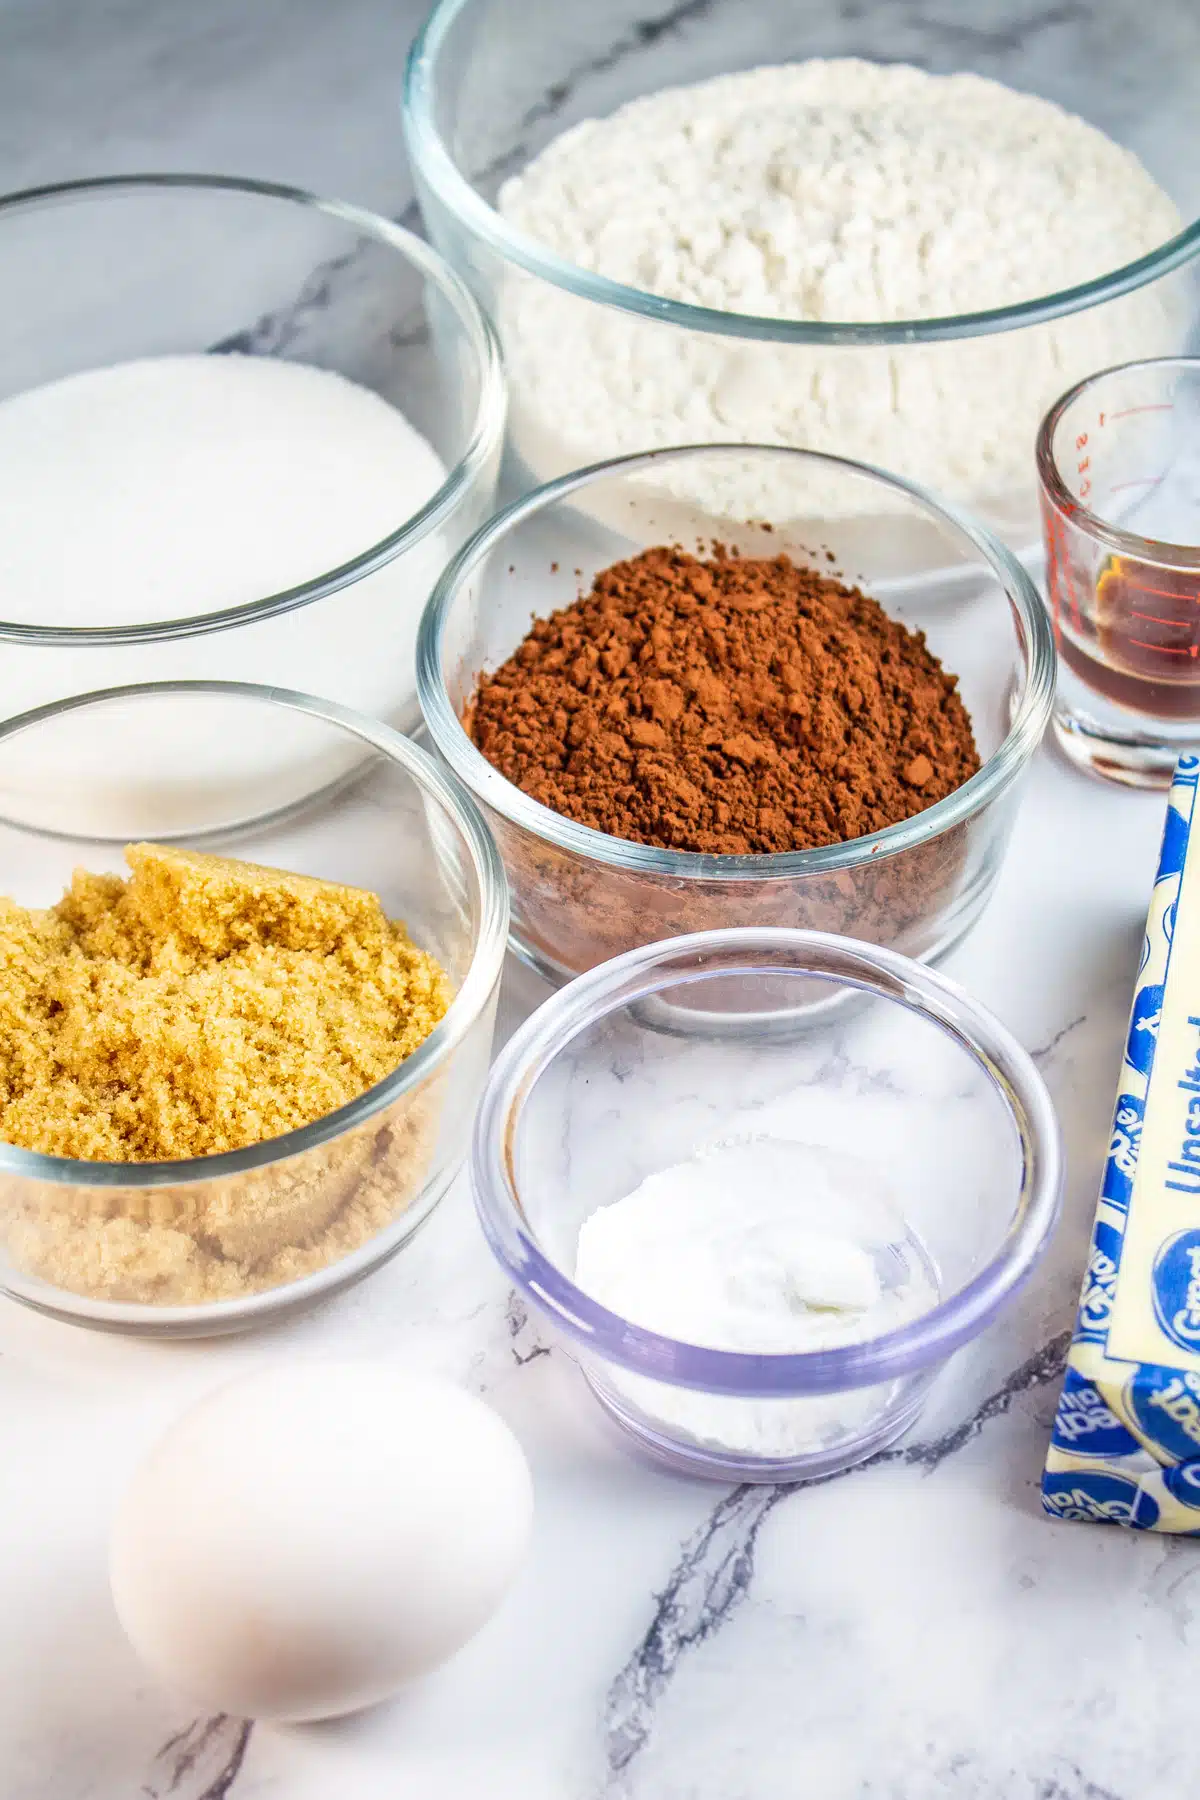 Tall image showing ingredients needed for chocolate cookies.